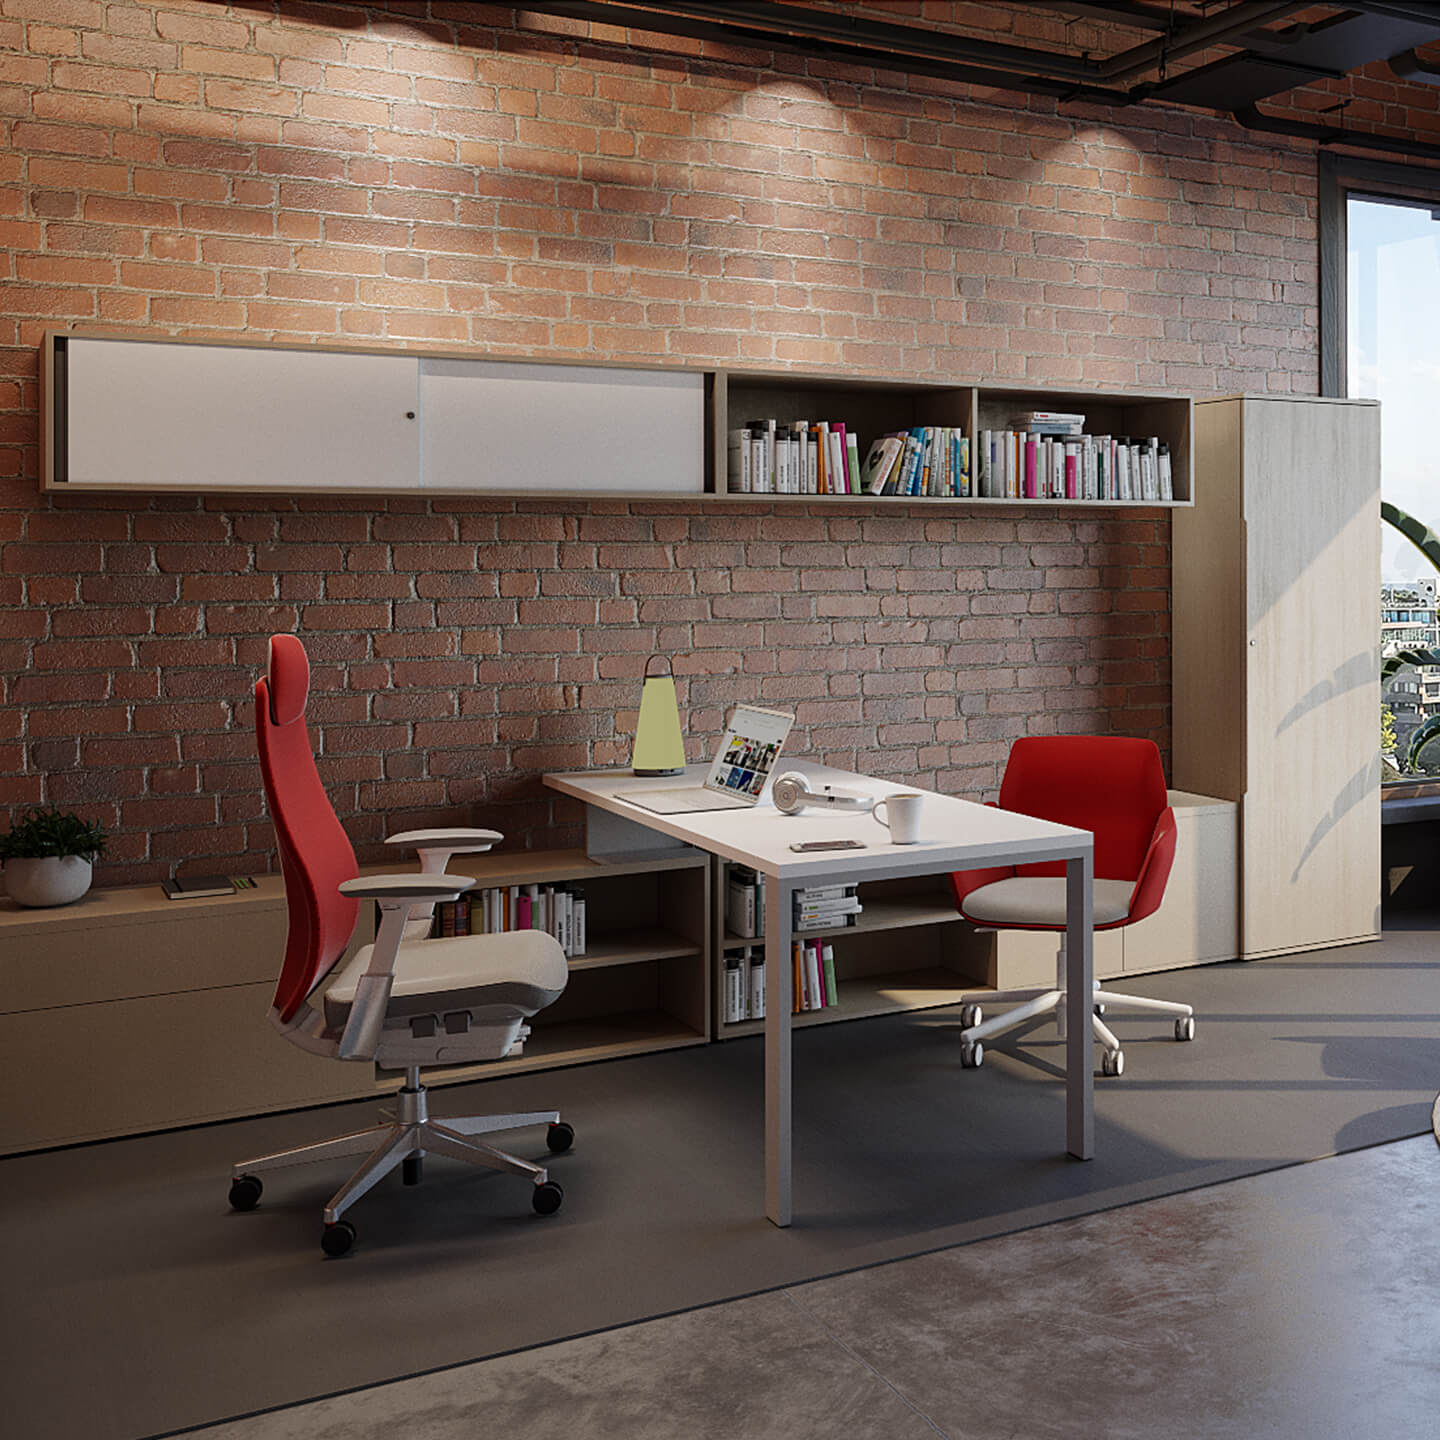 Haworth EZ Workspace partial divider at a desk with chair and storage space with a brick wall